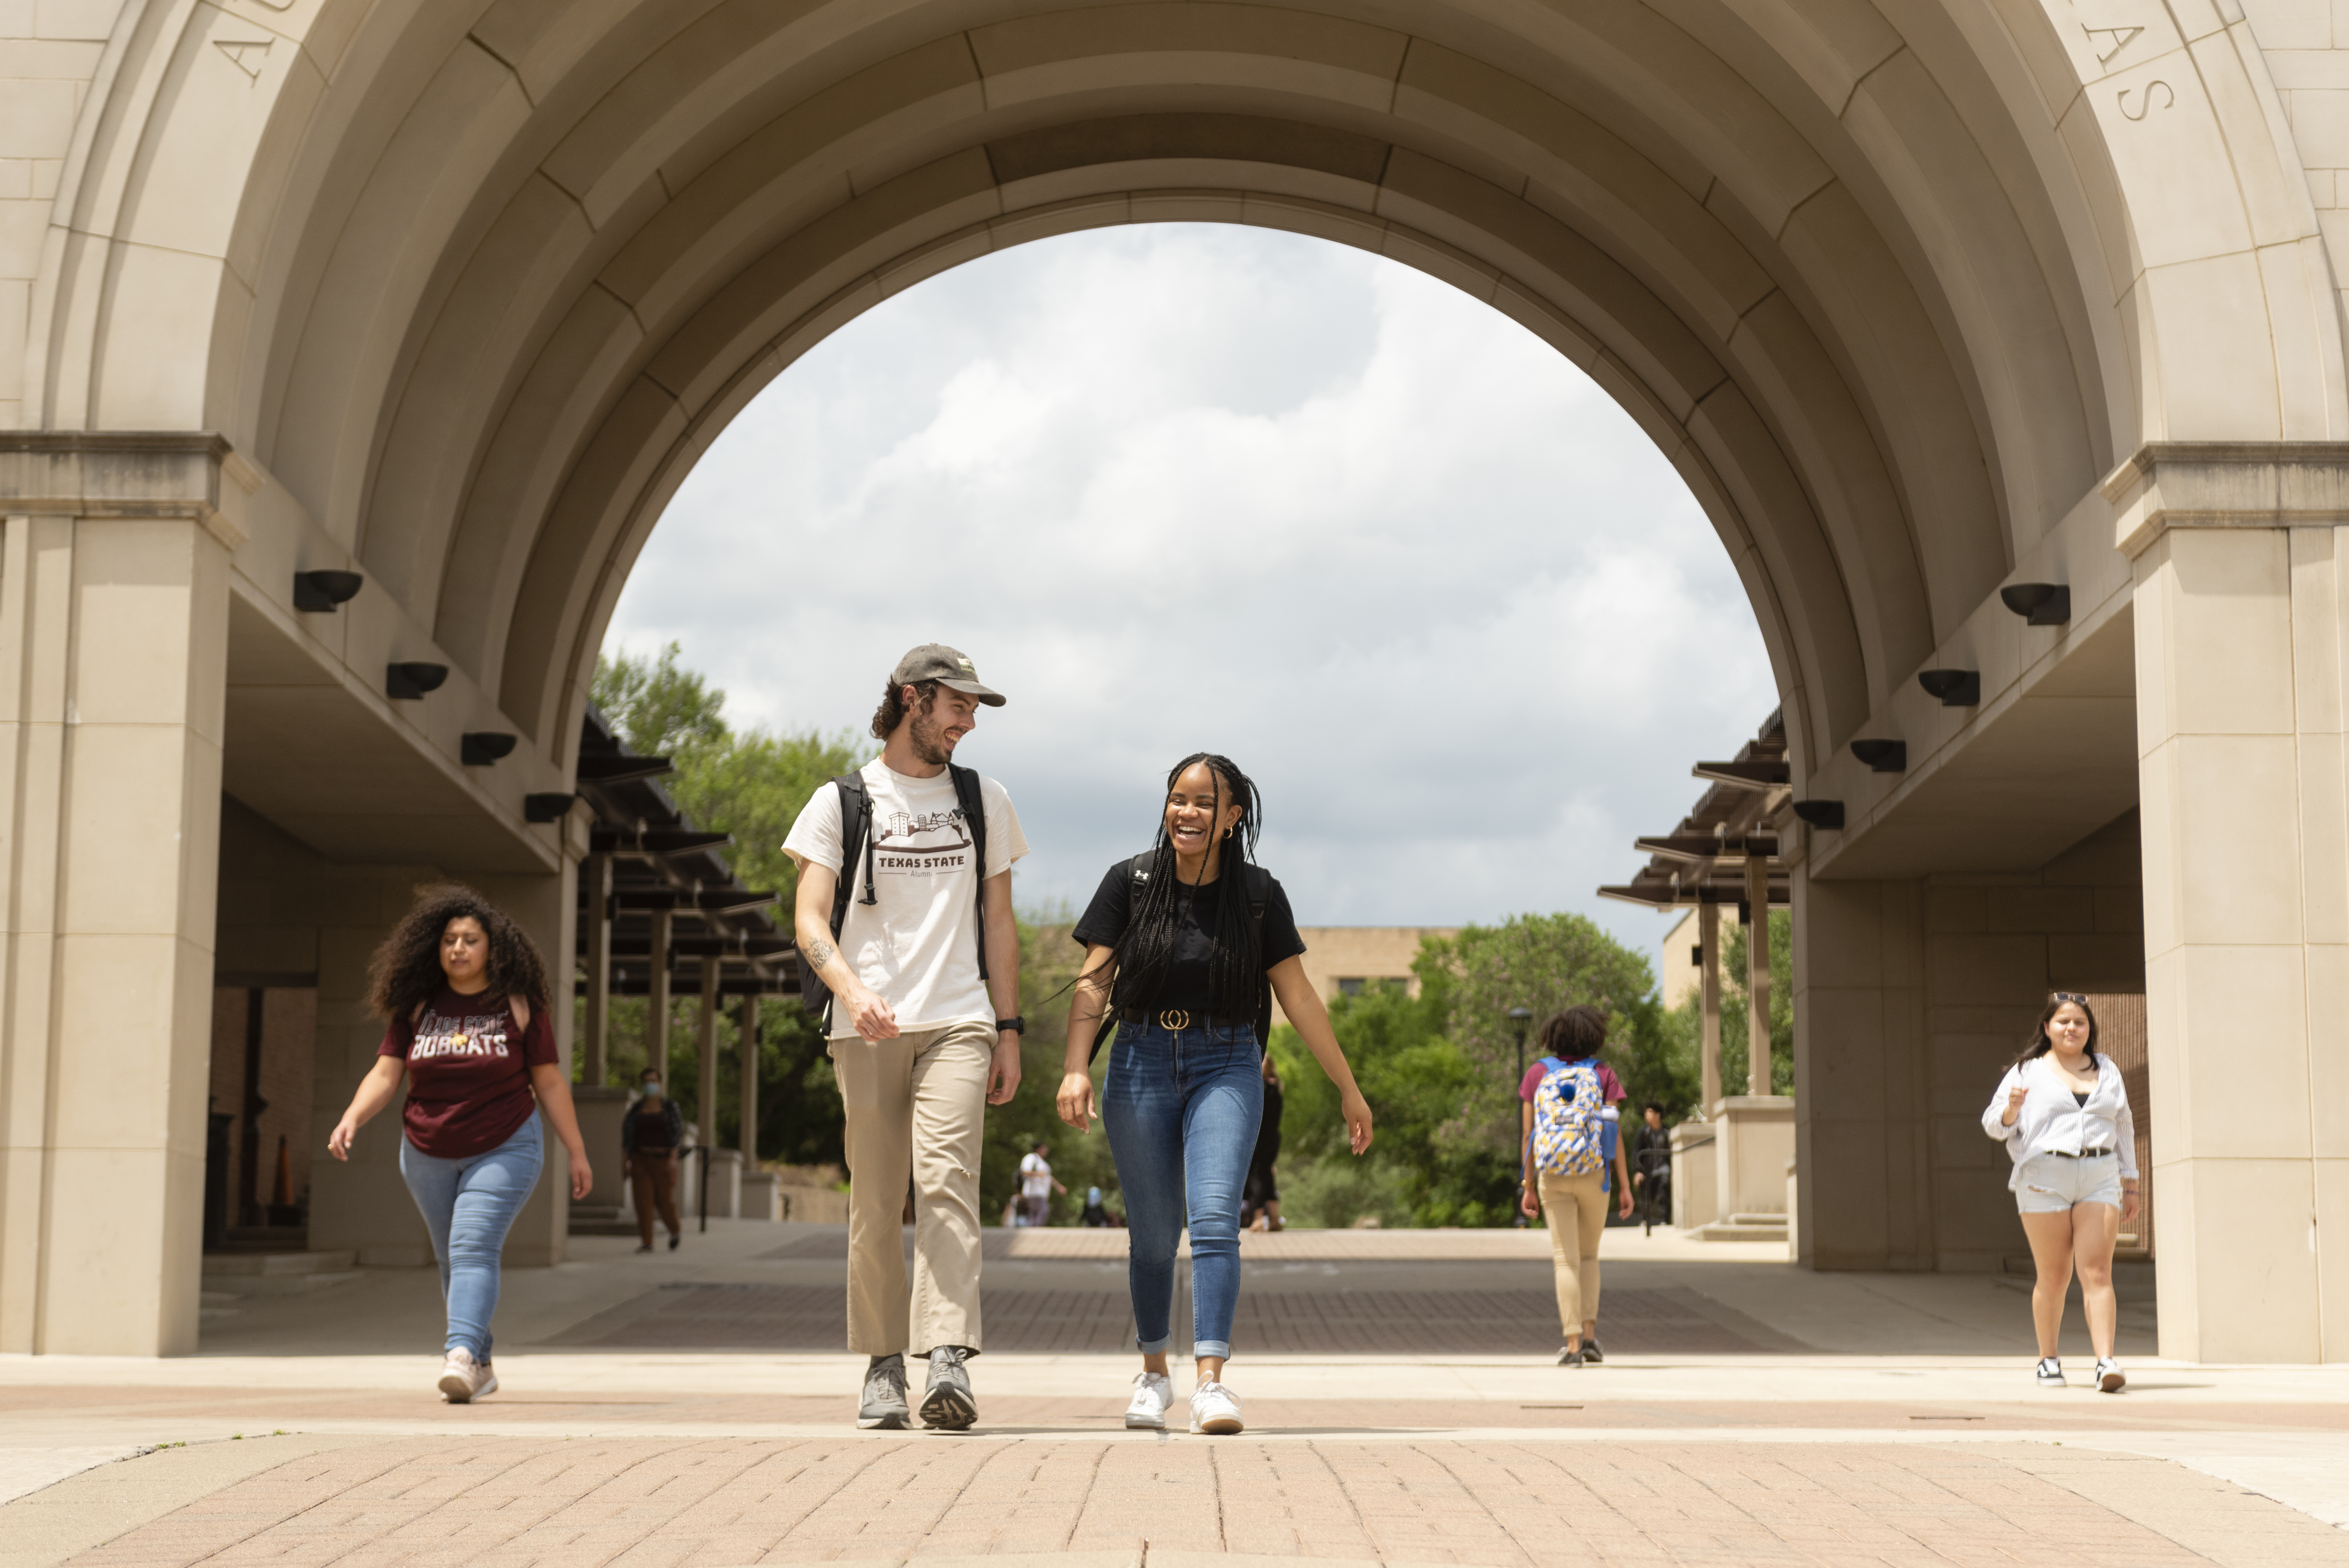 Students walking under the arch